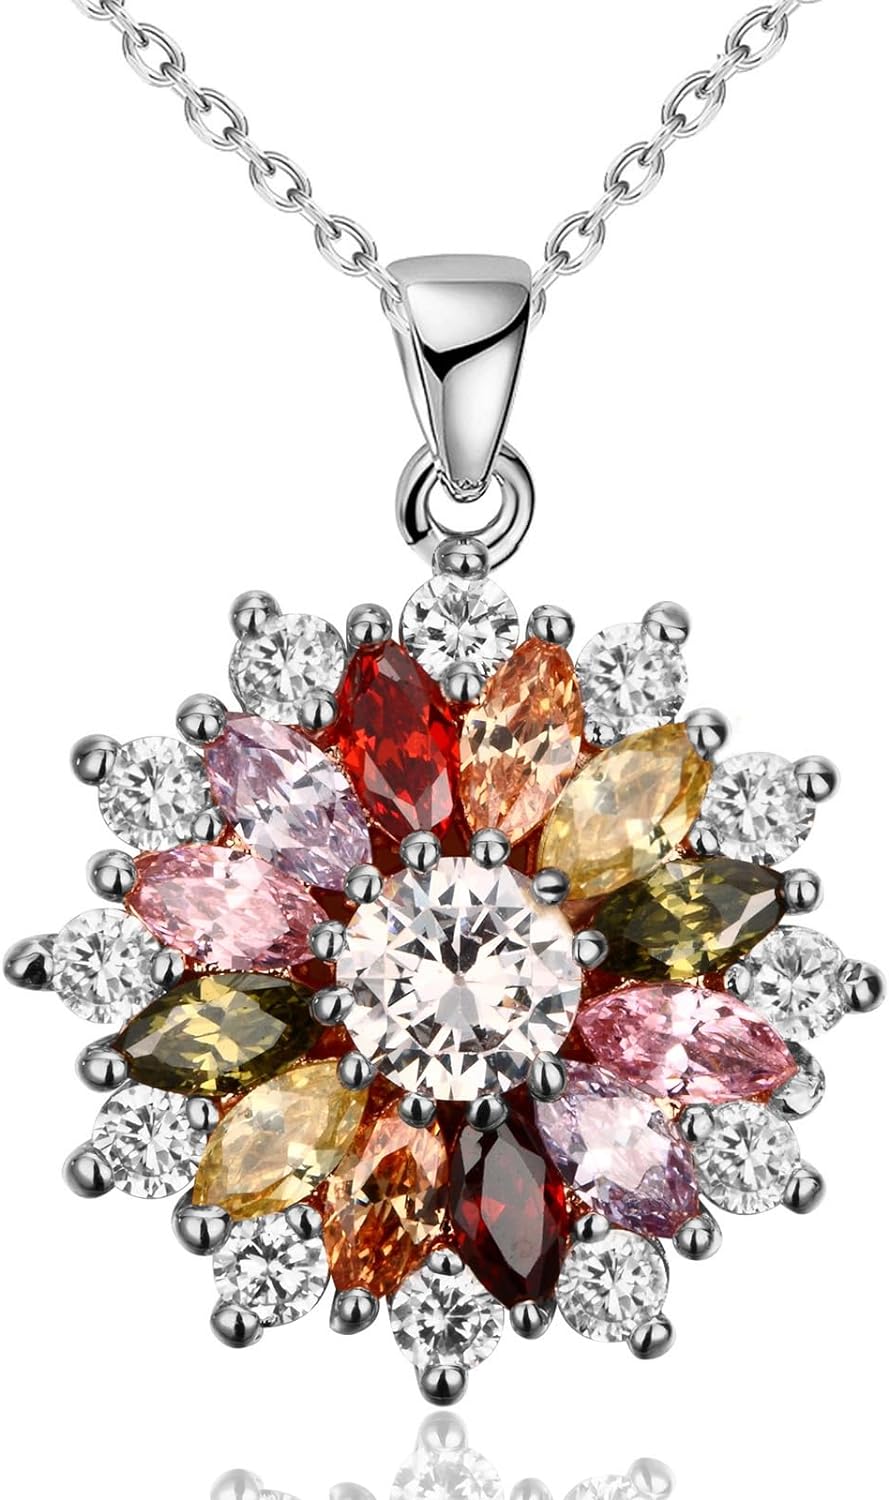 VONSSY Colorful Snowflake Pendant Necklace Earrings Rose Gold 5A Cubic Zirconia | Crystal Sweater Chain | Multi Gemstone Garnet Amethyst Morganite Peridot Prom Rhinestone Necklaces for Women Girls Daughter Sister Vintage Stylish Gift